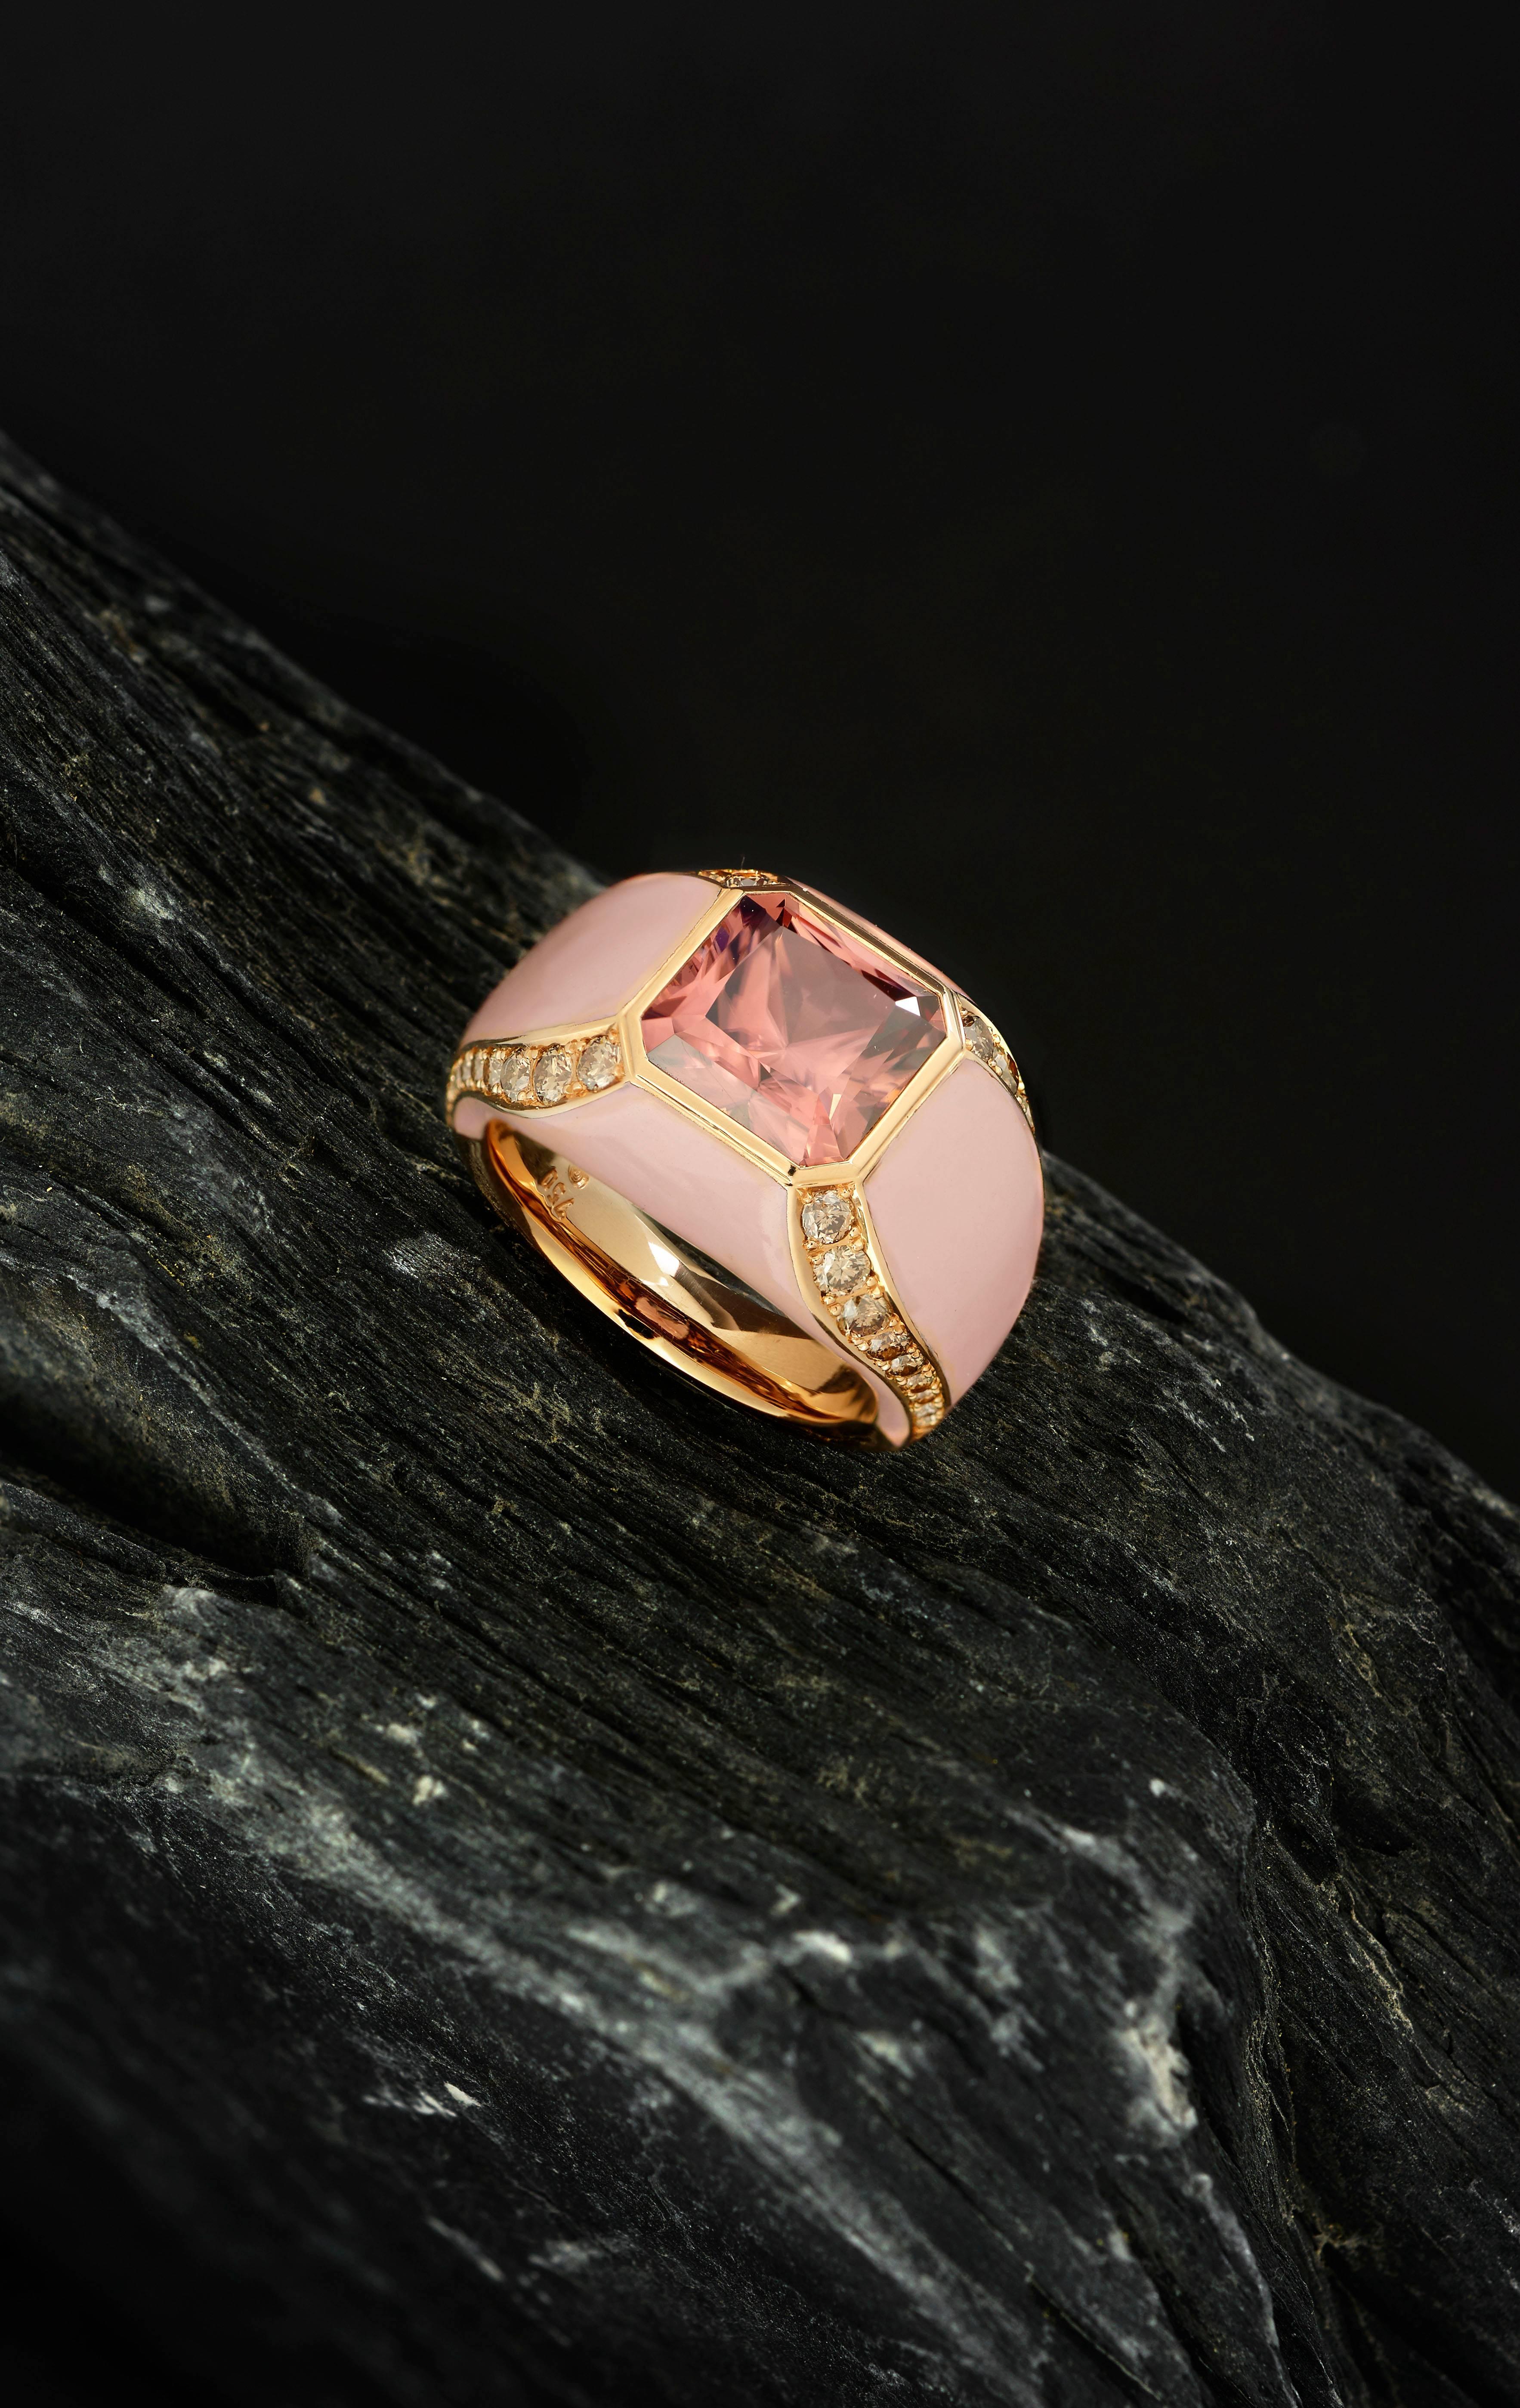 This one-off ring is handmade in Switzerland with an asscher cut Malayan Zircon of 5.57 ct. and 44 champagne Diamonds of total 0.65 ct. It is made with rose ceramic and 18K rose gold (4N).
You can expect the best Swiss workmanship and quality.
ring